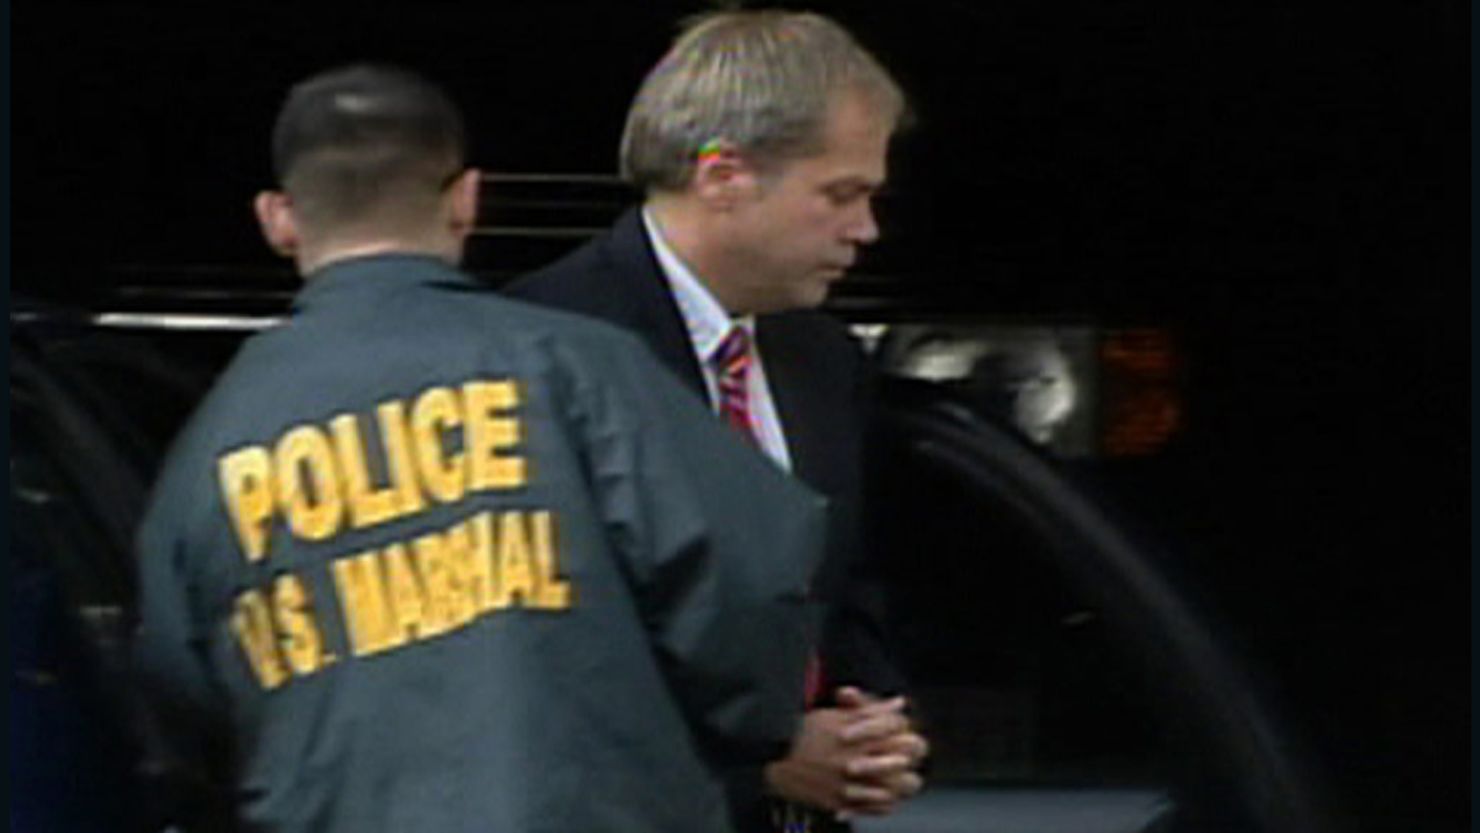 John Hinckley, seen here in 2003, has been allowed brief furloughs from a Washington mental hospital to visit his mother.